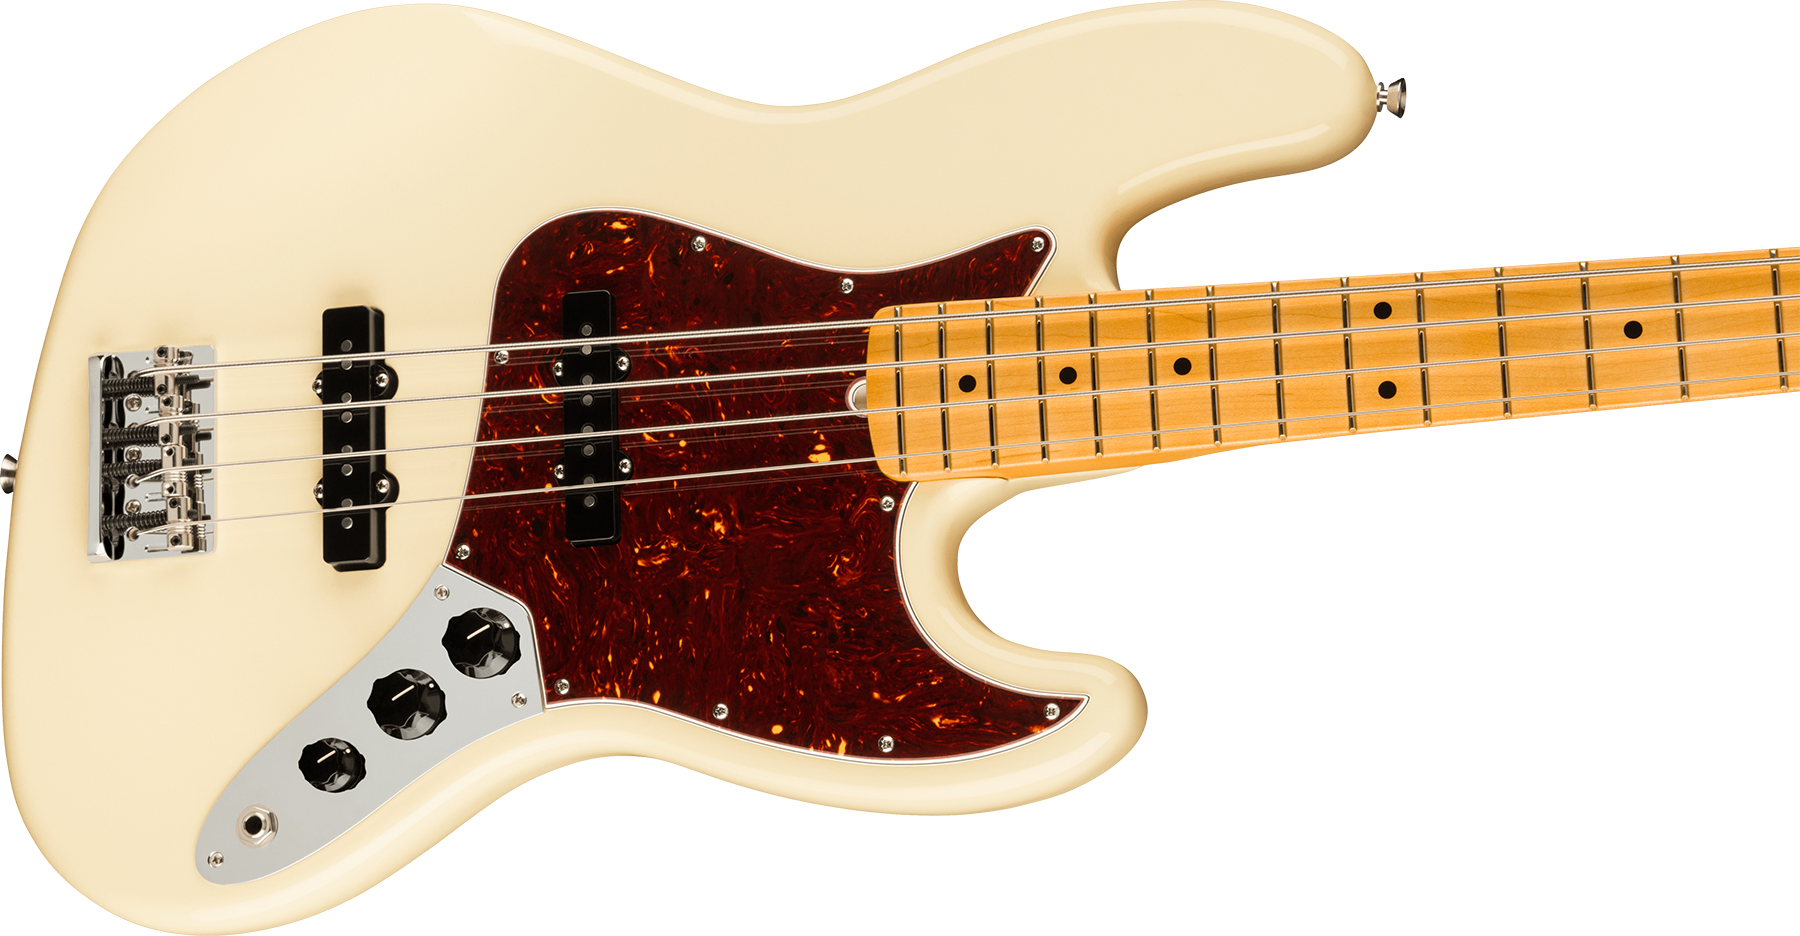 Fender Jazz Bass American Professional Ii Usa Mn - Olympic White - Basse Électrique Solid Body - Variation 3